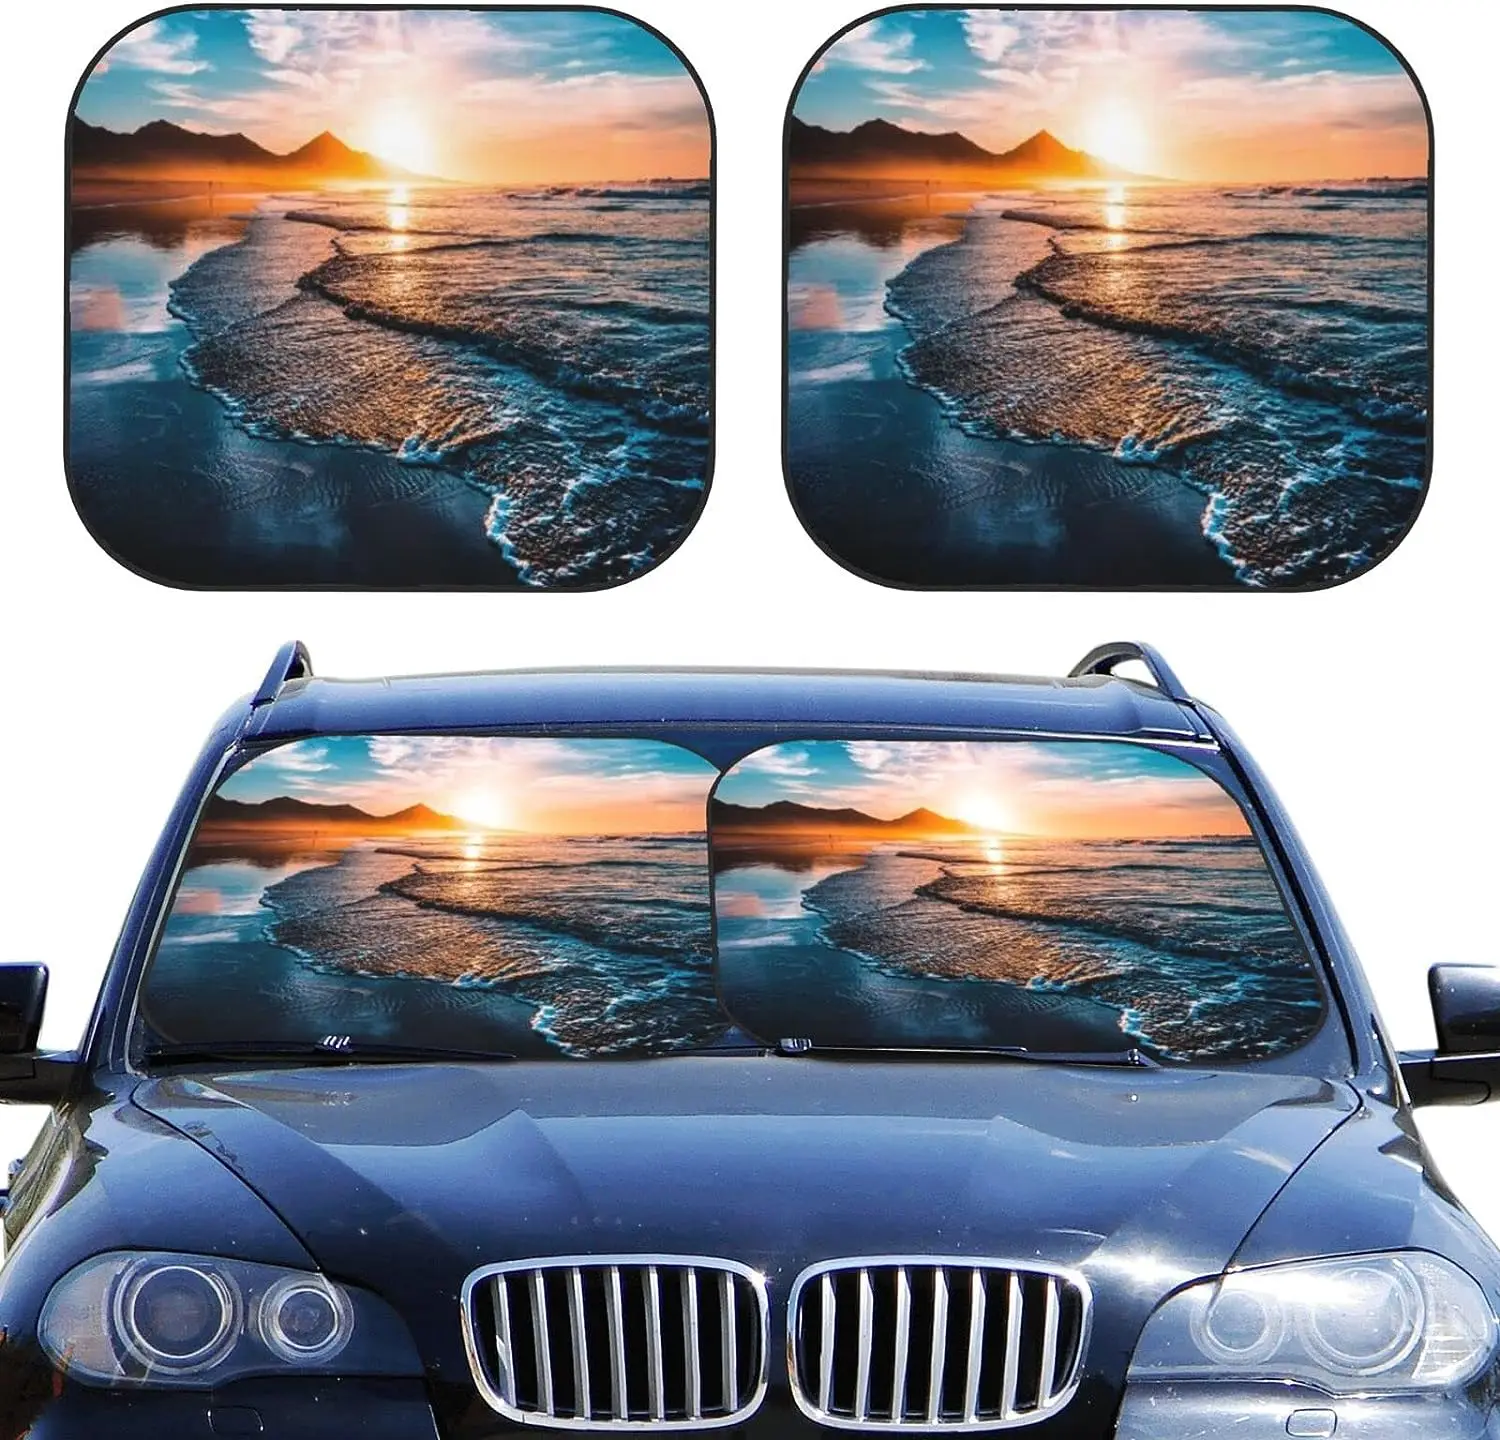 

Beach Sunset Car Windshield Sun Shade Auto Foldable 2pcs Window Sunshades for Most Windshield Front Window Car Accessories